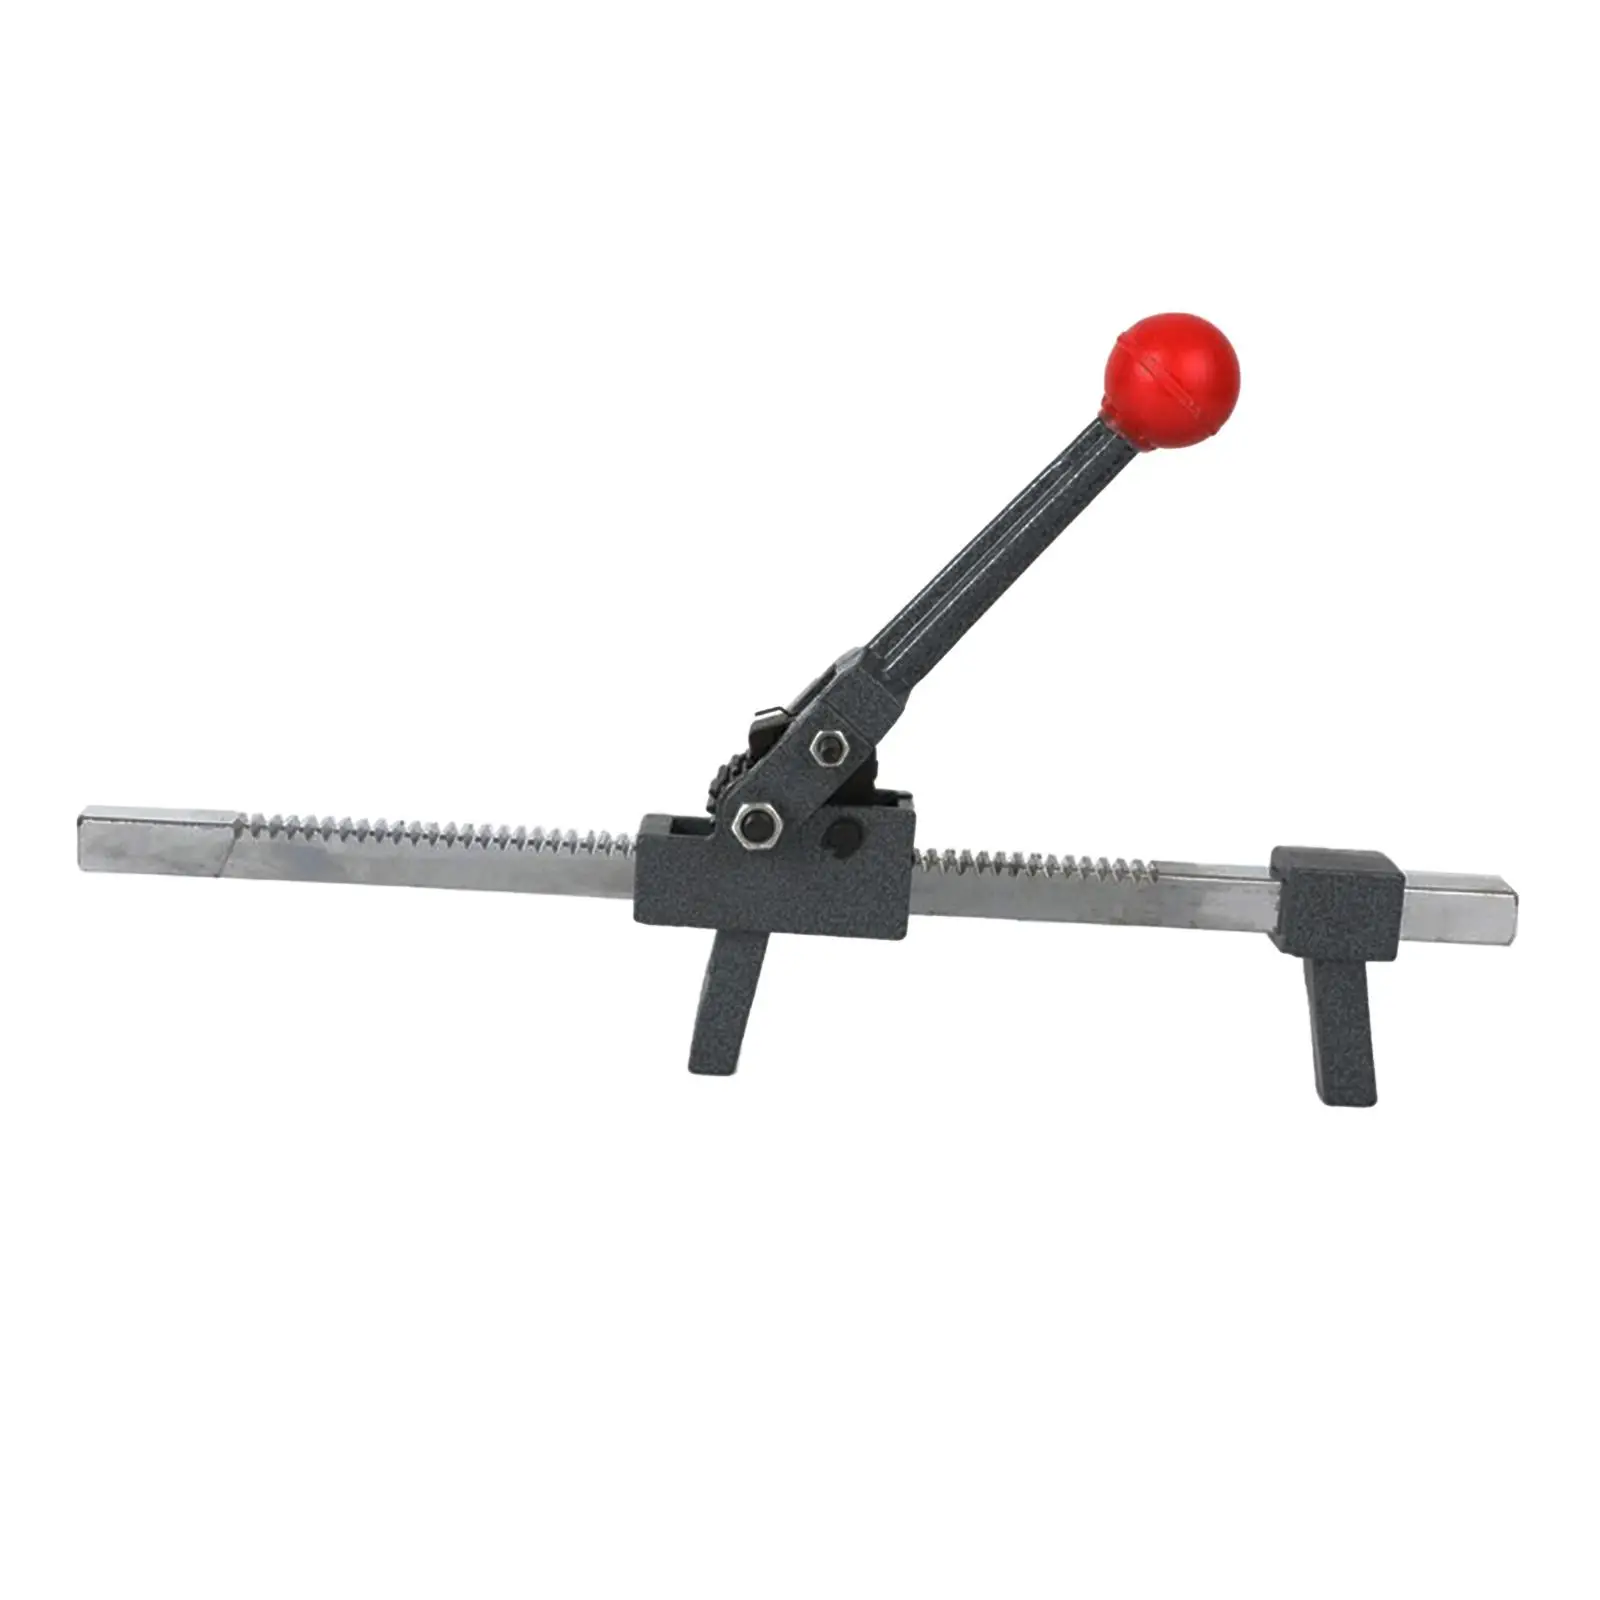 Manual Tire Changer High Performance Premium Car Accessories Mounting Tool